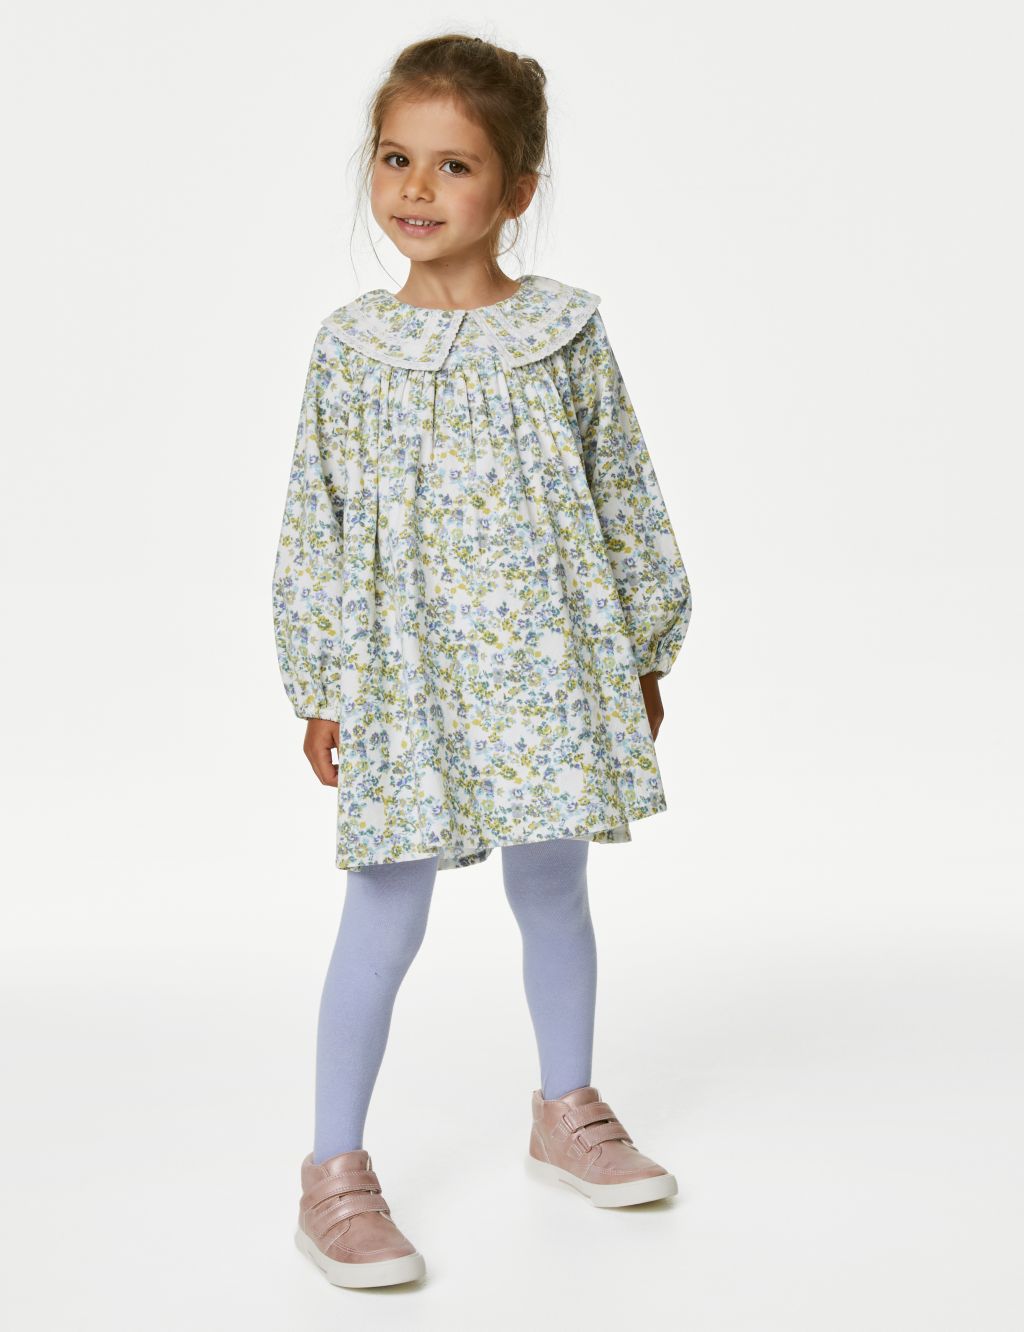 Cotton Rich Floral Top & Bottom Outfit (2-8 Yrs) image 1